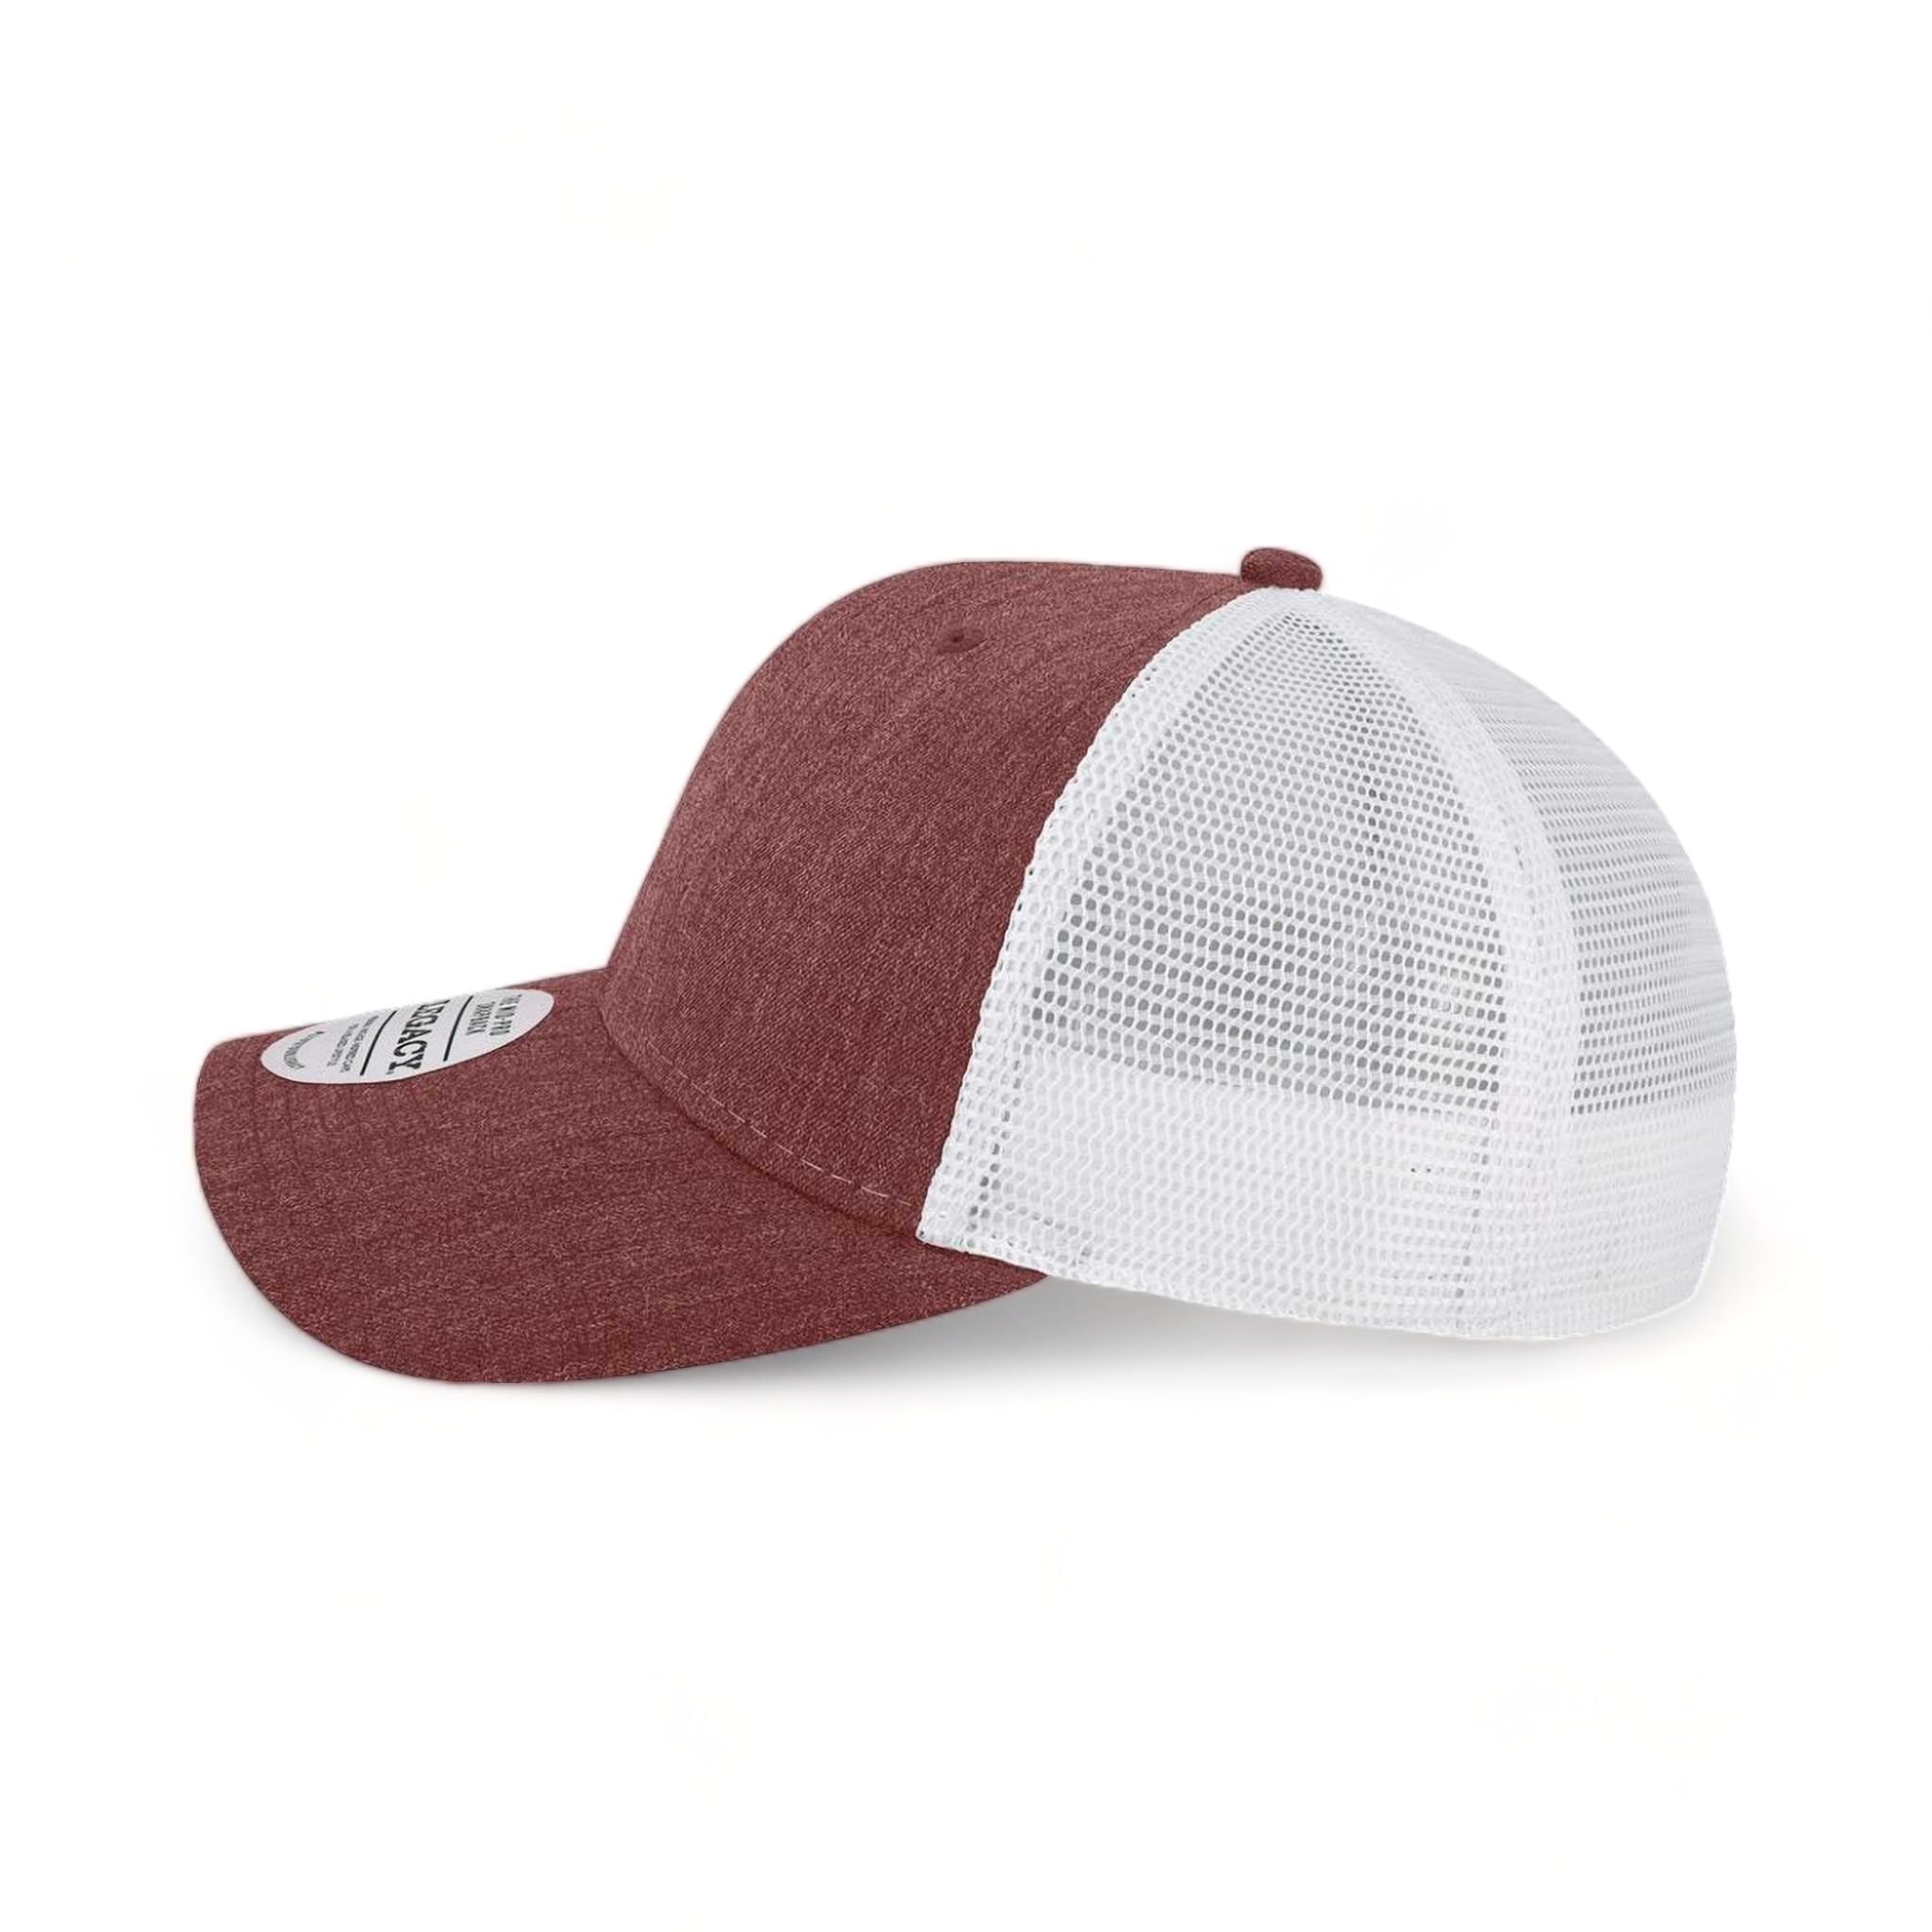 Side view of LEGACY MPS custom hat in mélange burgundy and white